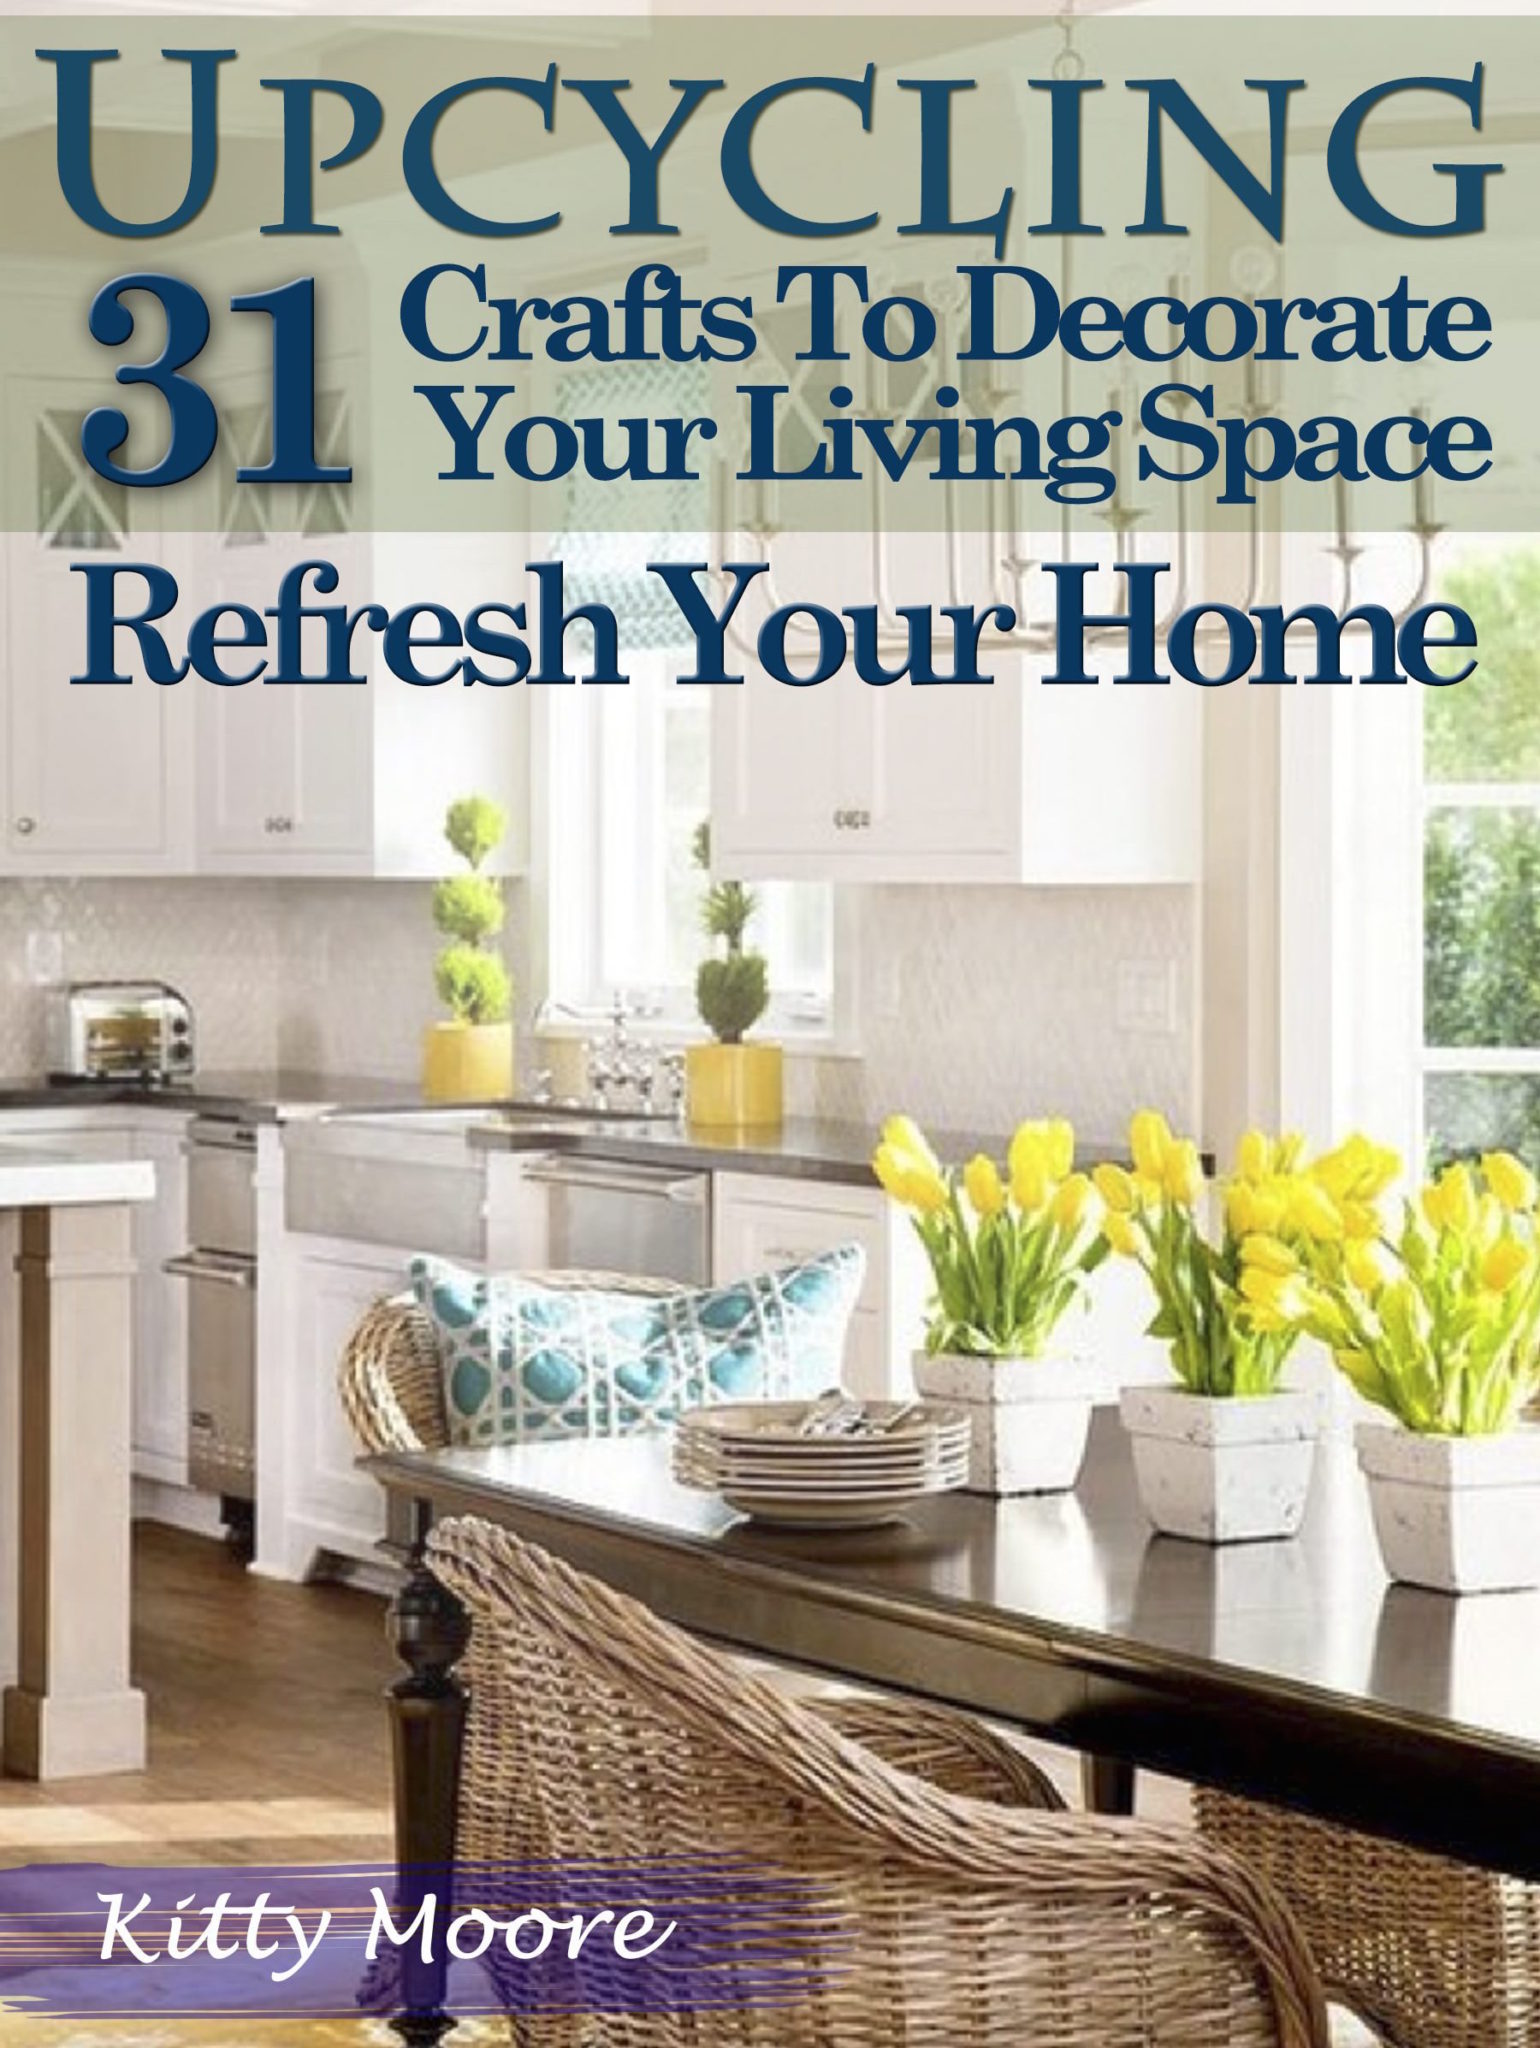 FREE: Upcycling: 31 Crafts to Decorate Your Living Space & Refresh Your Home (3rd Edition) by Kitty Moore